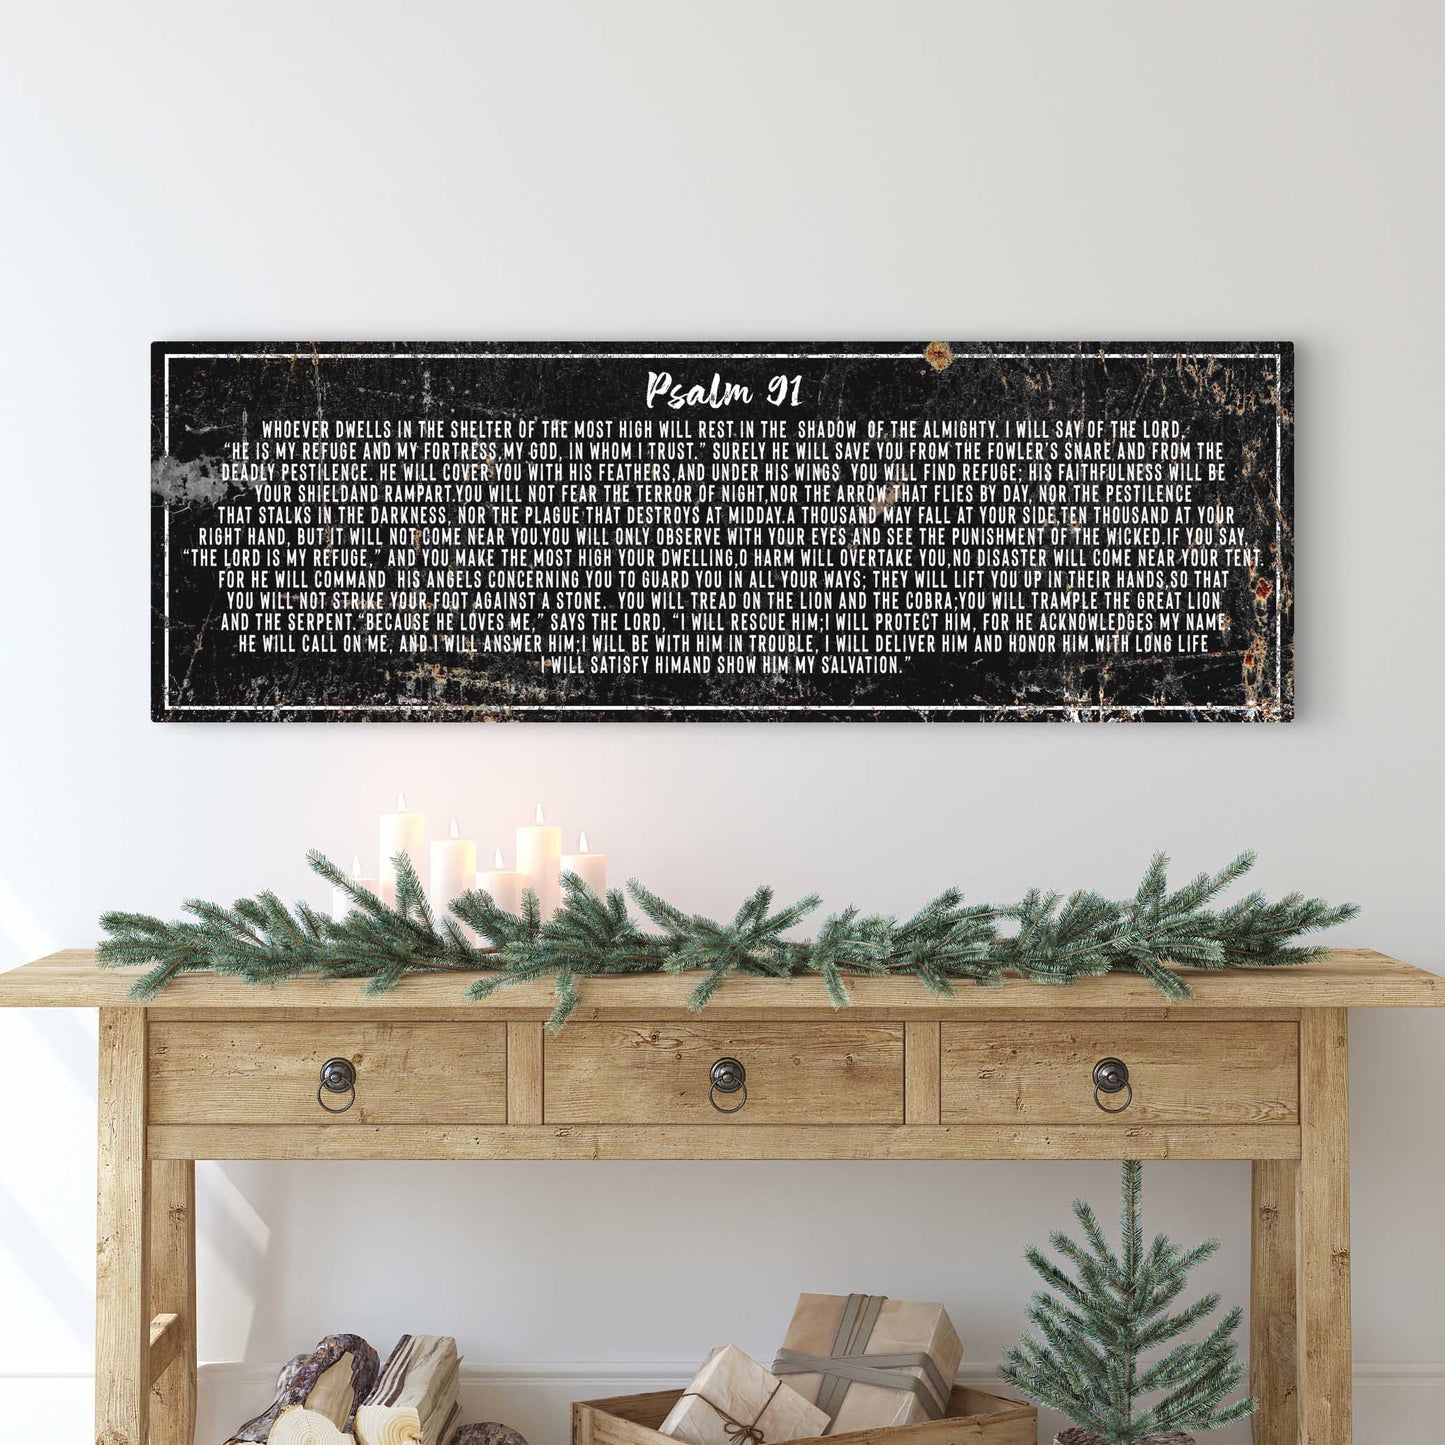 Psalm 91: 'He Is My Refuge' Sign - Inspirational Christian Wall Art for living room, religious decor